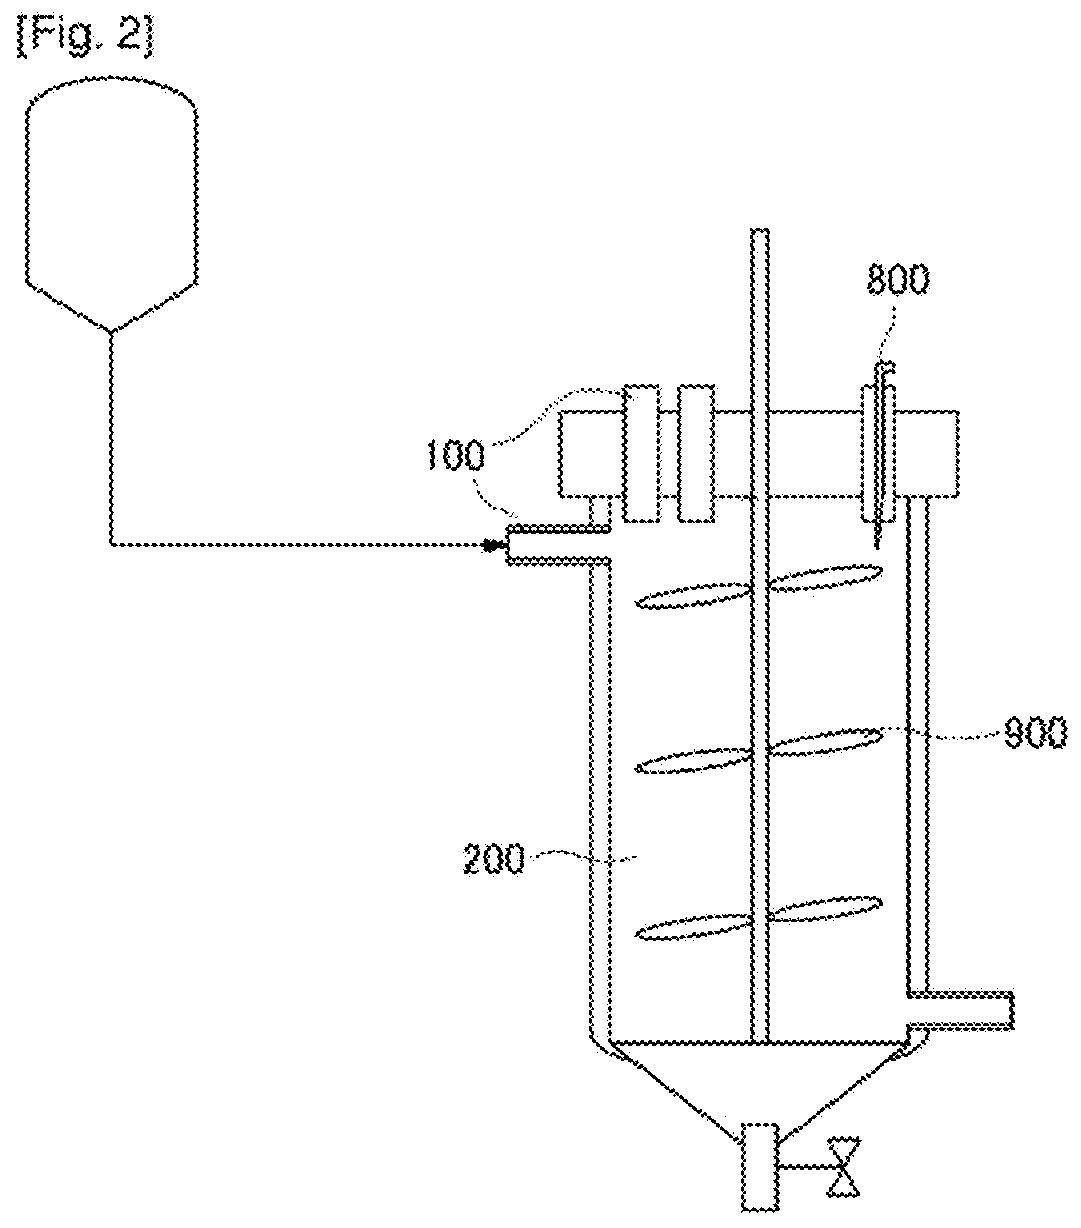 Apparatus and process for continuous saccharification of marine algae and cellulosic biomass